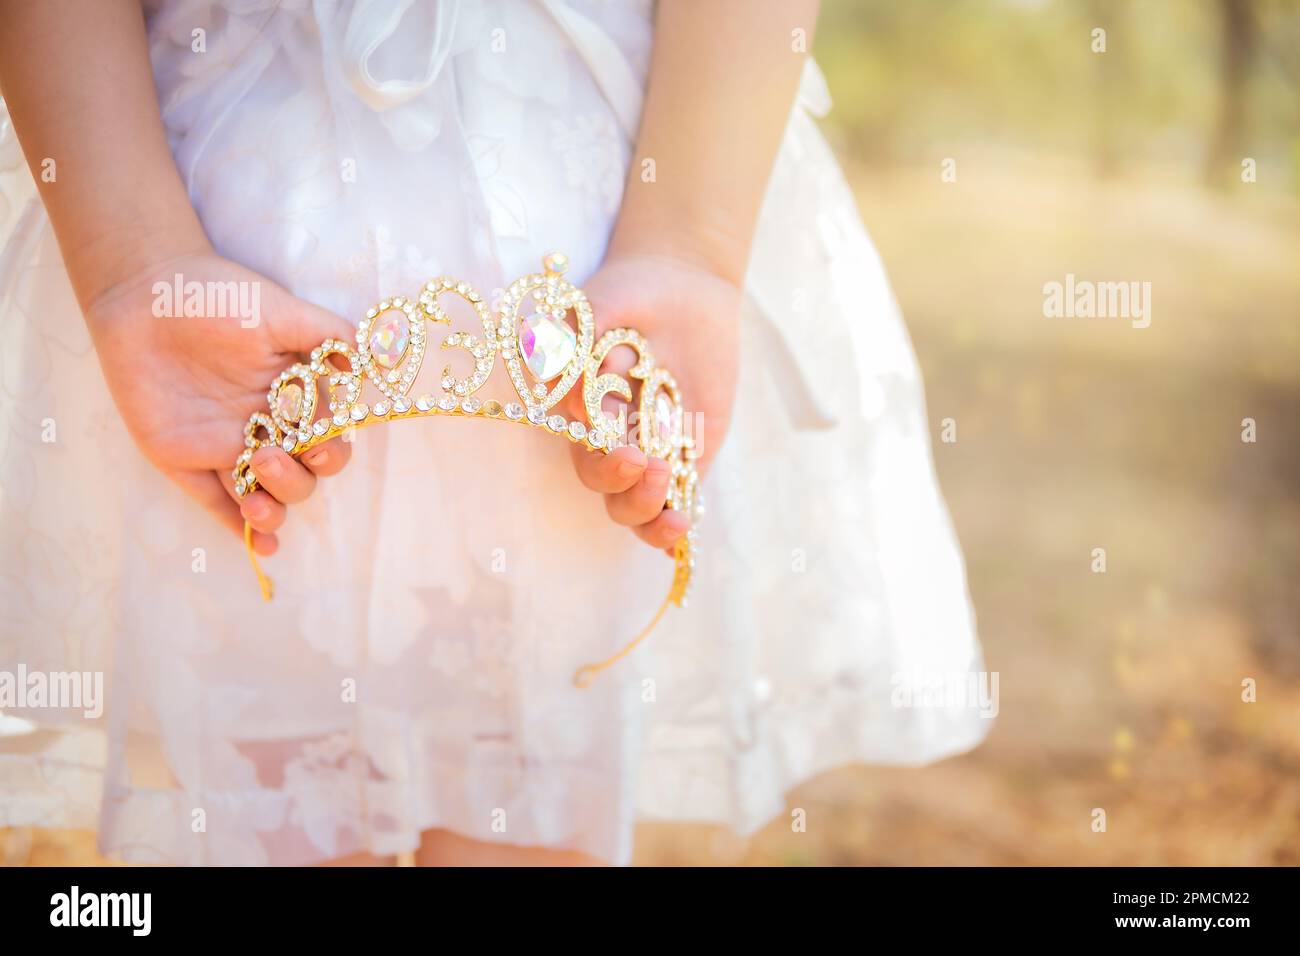 Little girl in white dress is on her back holding a princess crown, in a dreamy forest, copy space, children's day theme. Stock Photo